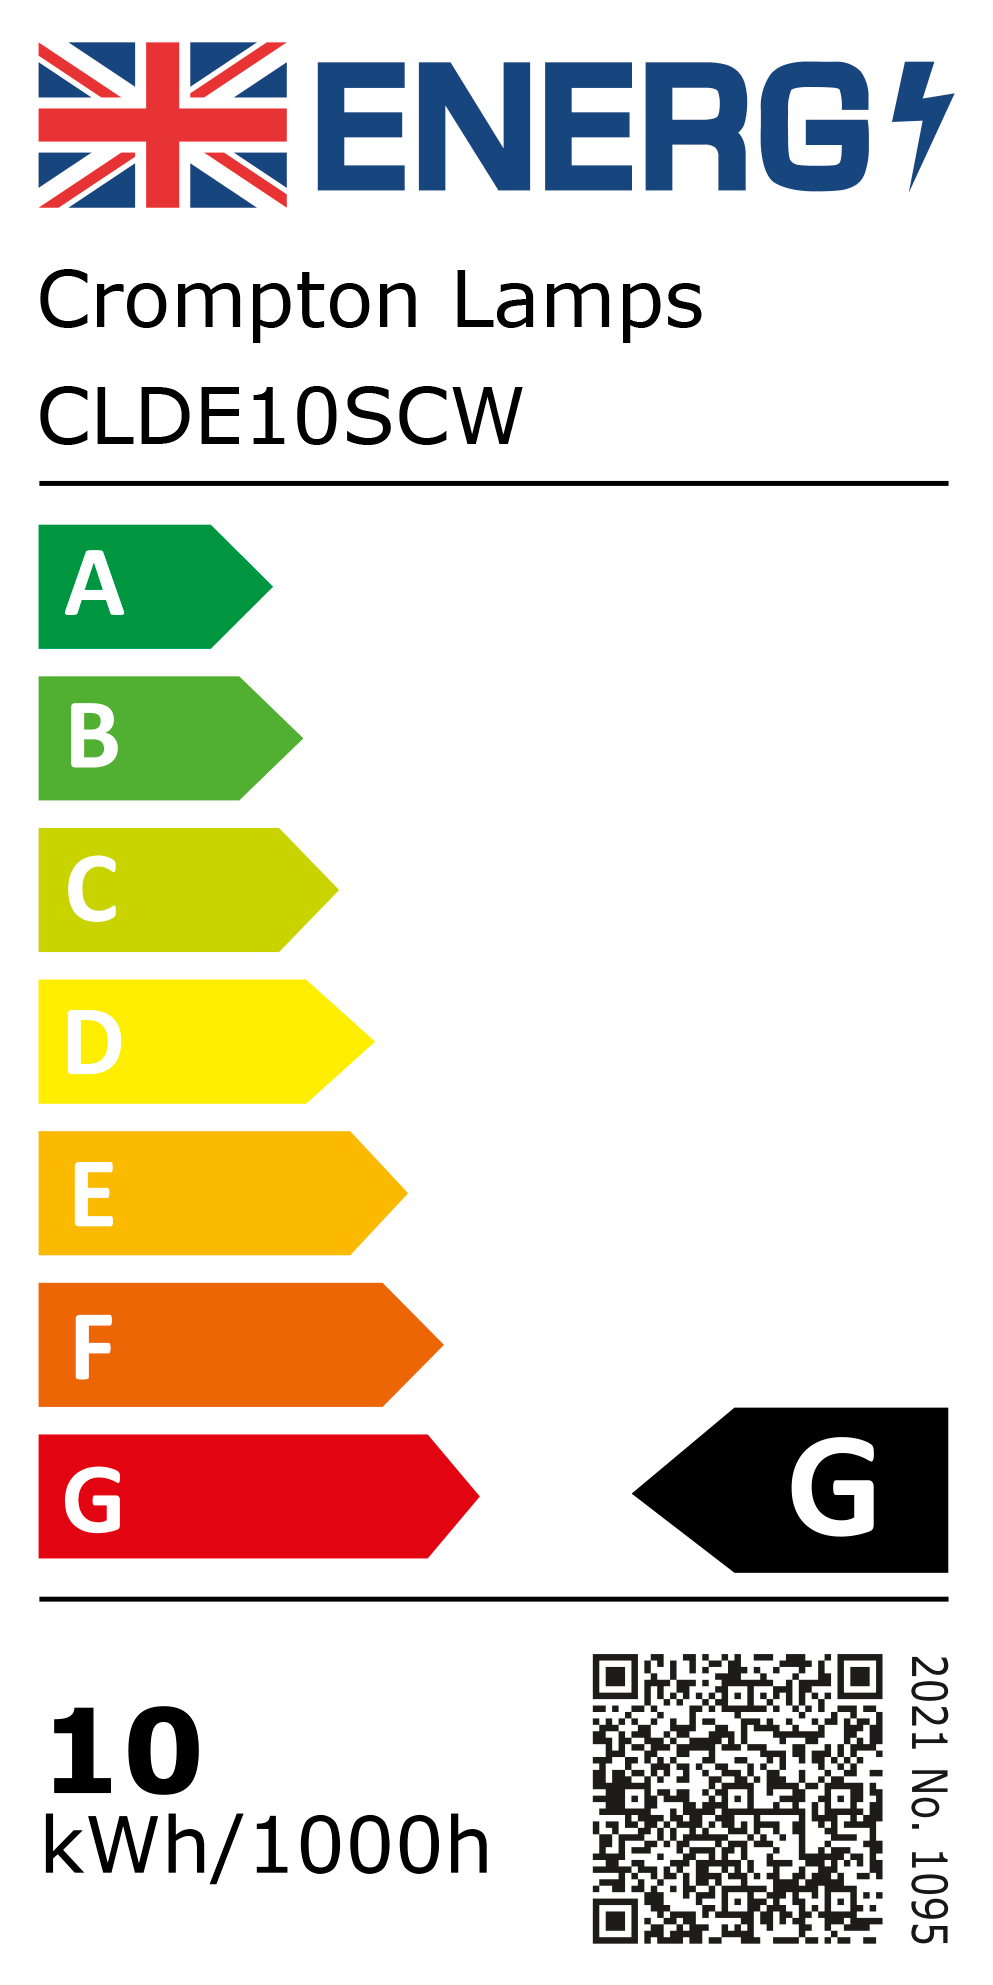 New 2021 Energy Rating Label: Stock Code CLDE10SCW